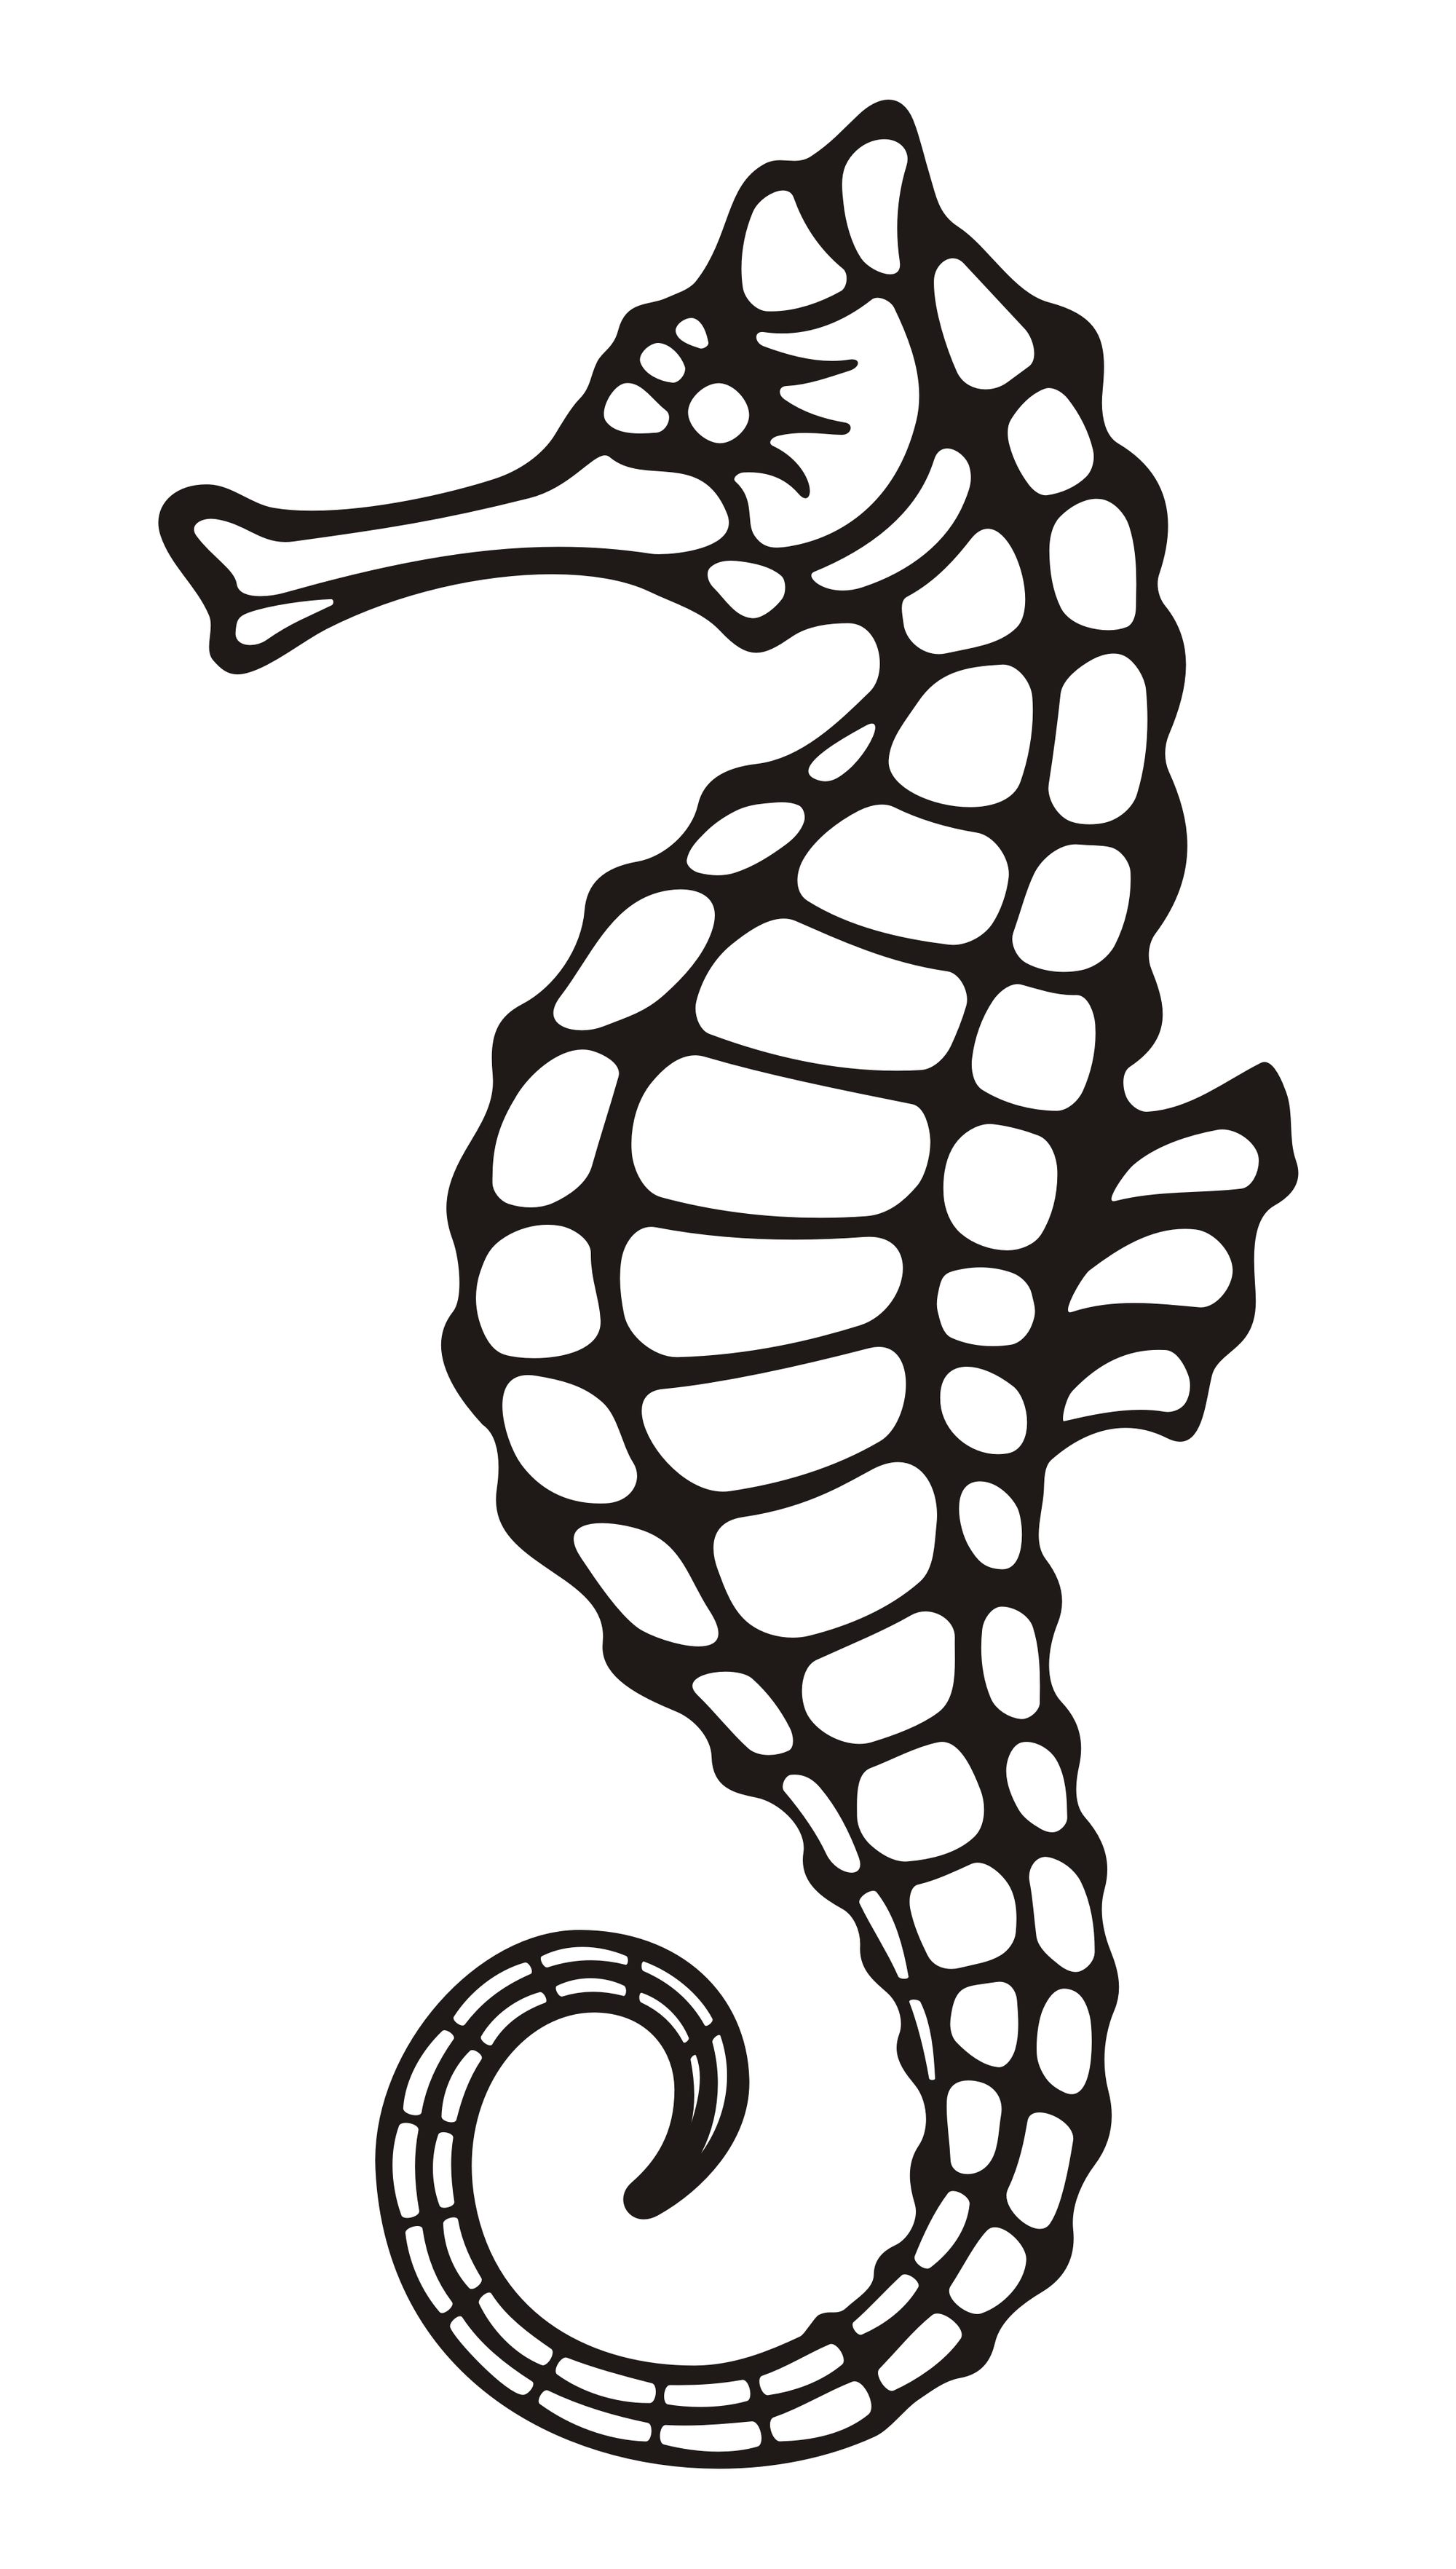 Seahorse drawing outline cliparts - dbclipart.com